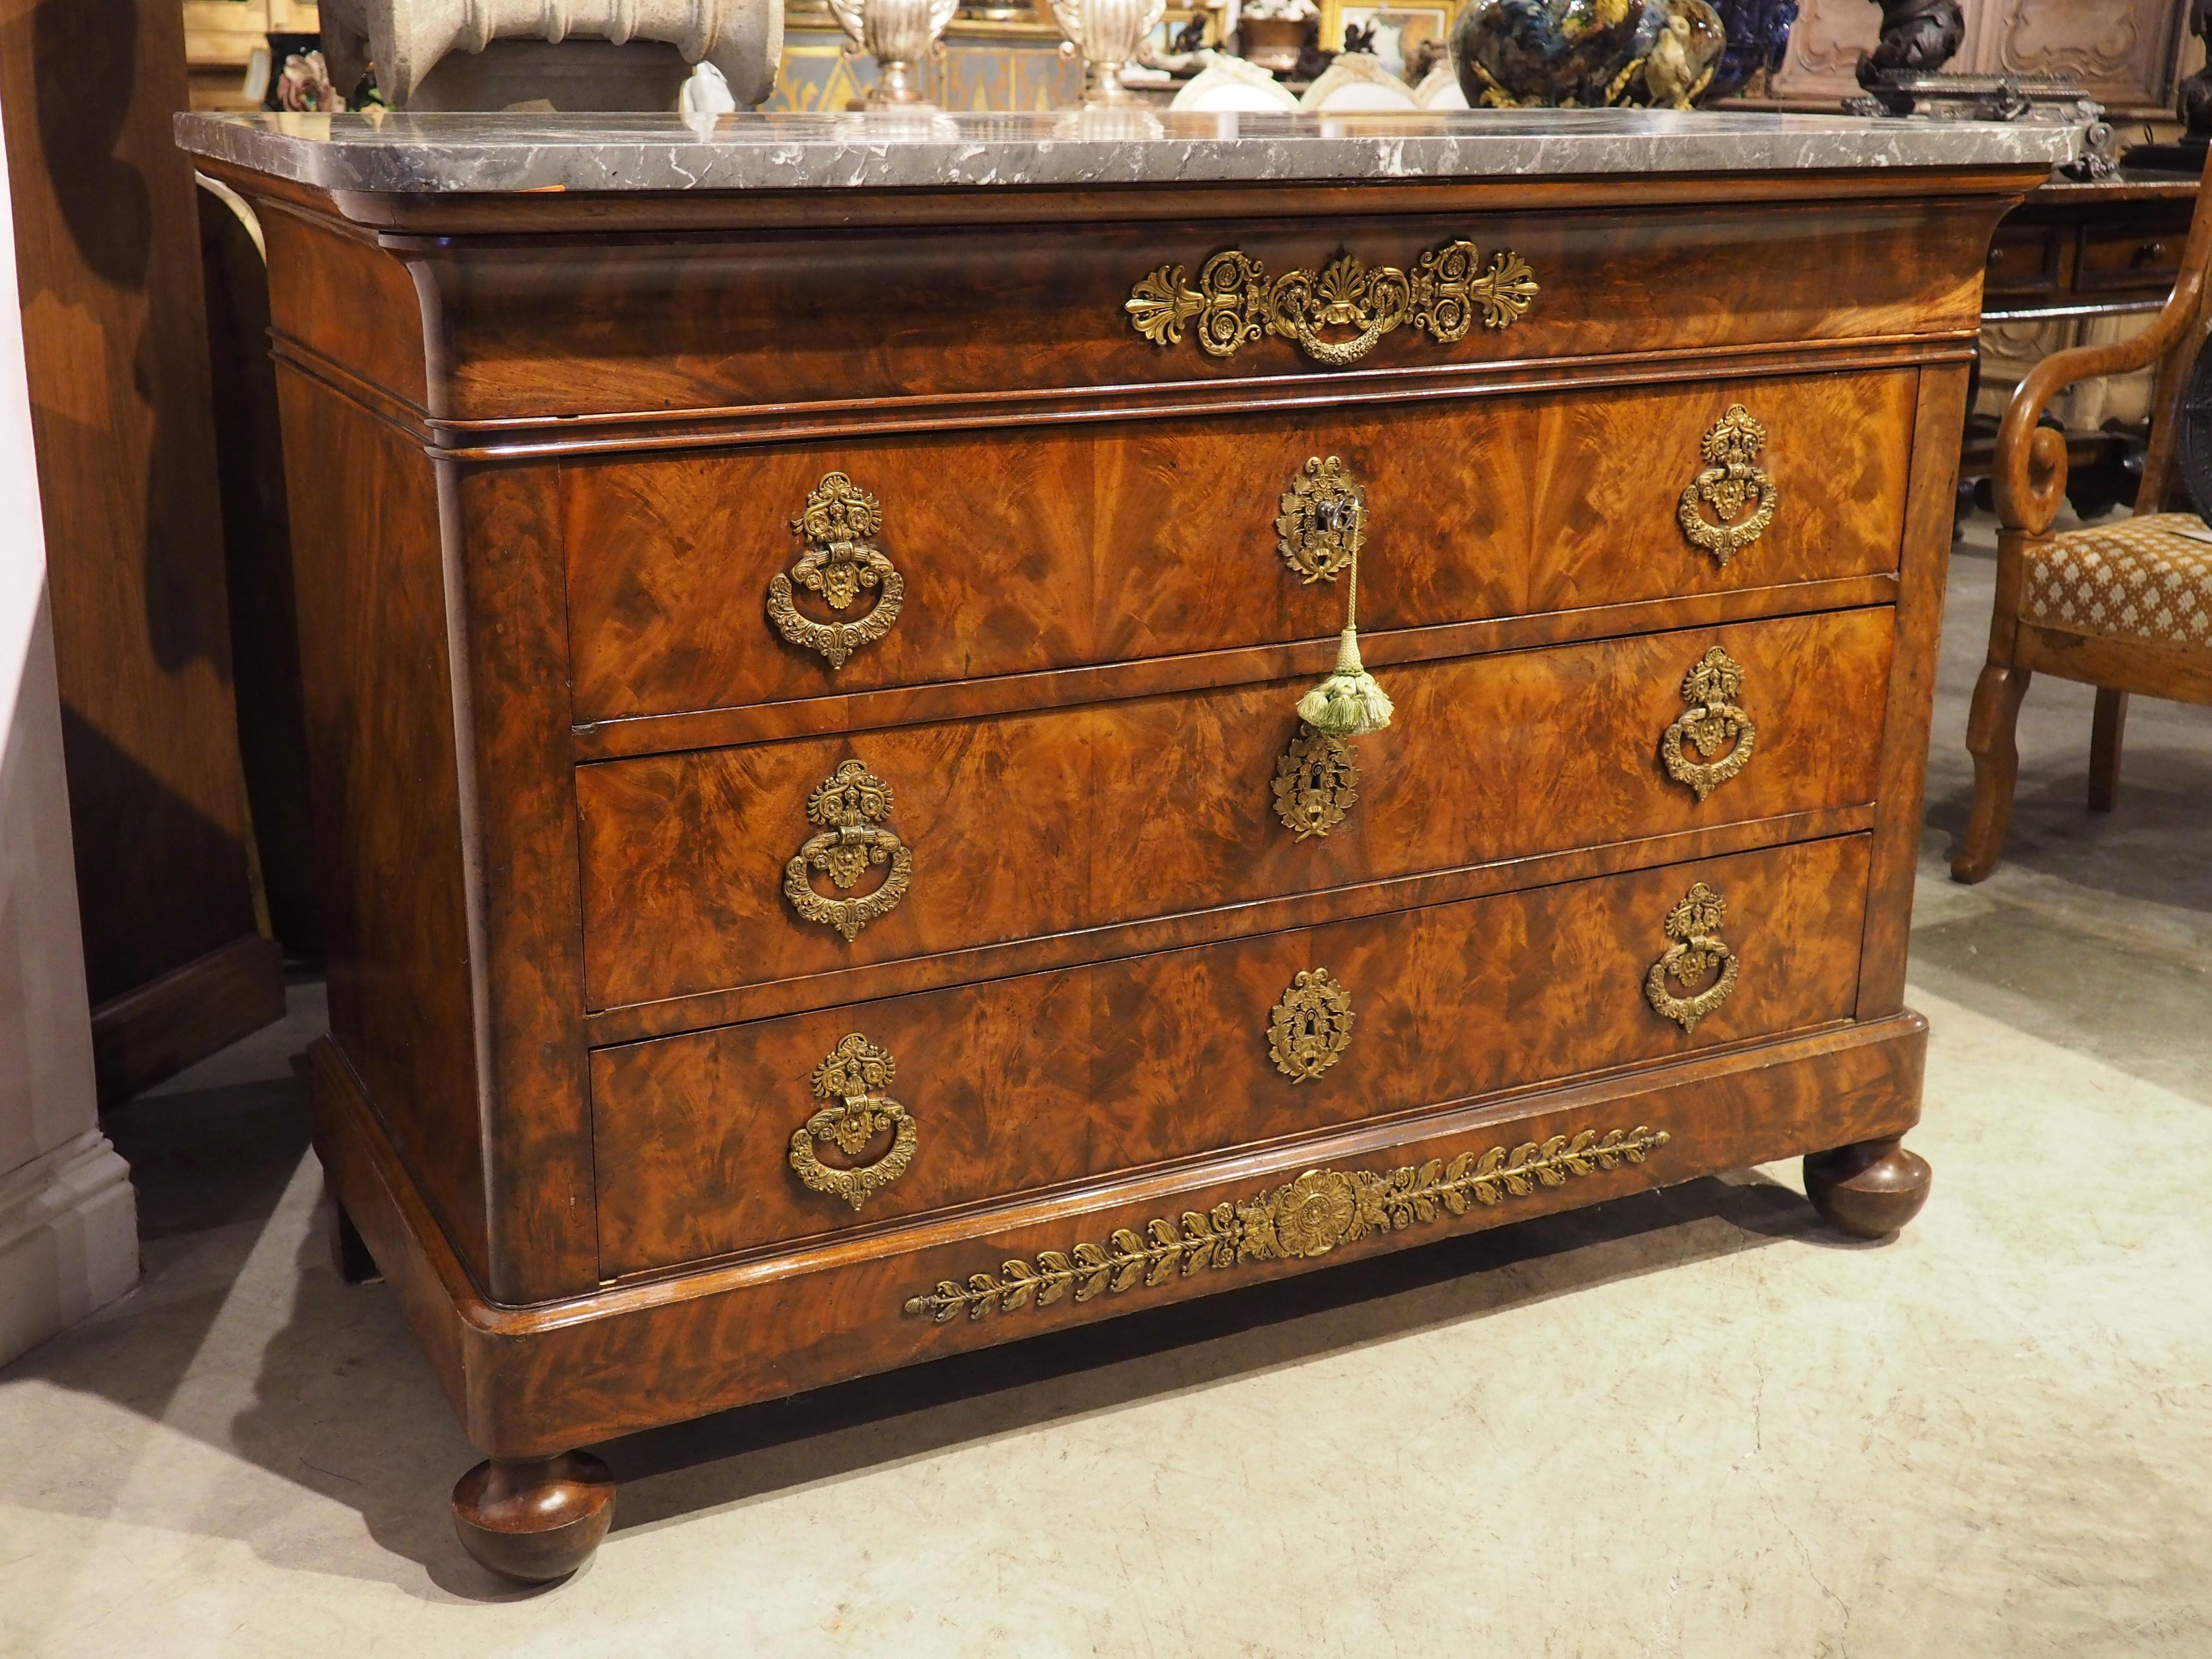 Circa 1820 French Restauration Commode in Flame Mahogany, Gilt Bronze Hardware For Sale 1